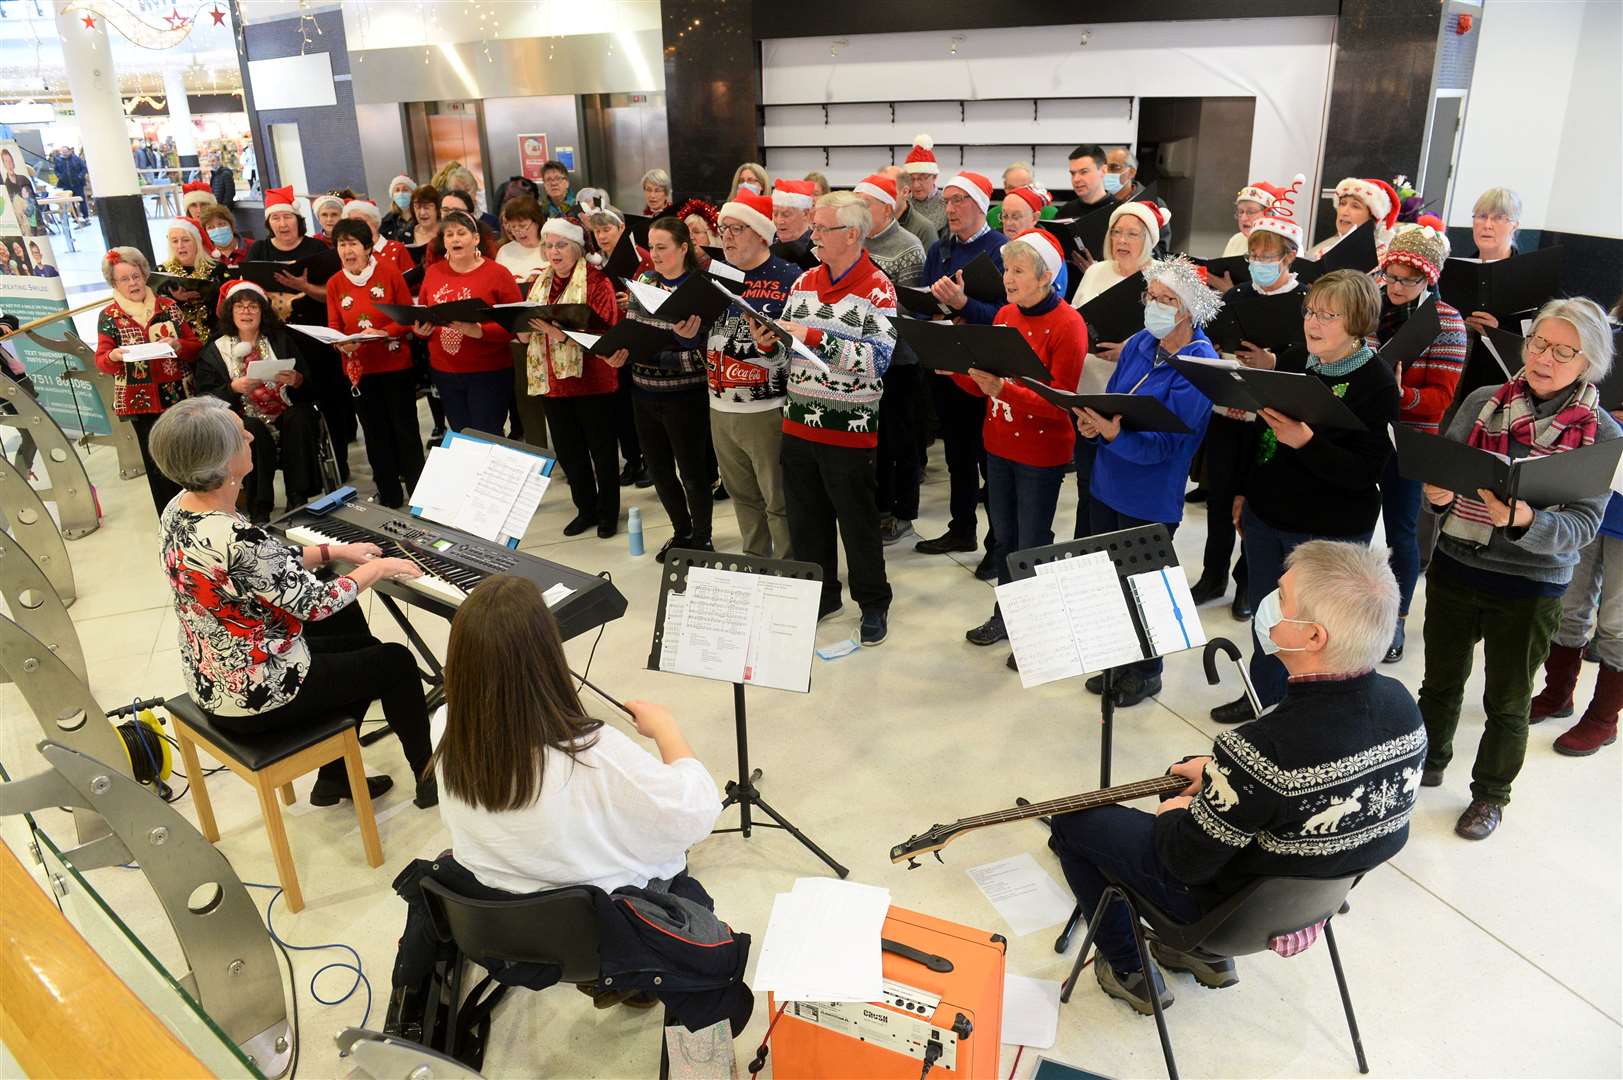 Acclaim Choir has performed at Eastgate Shopping Center before.